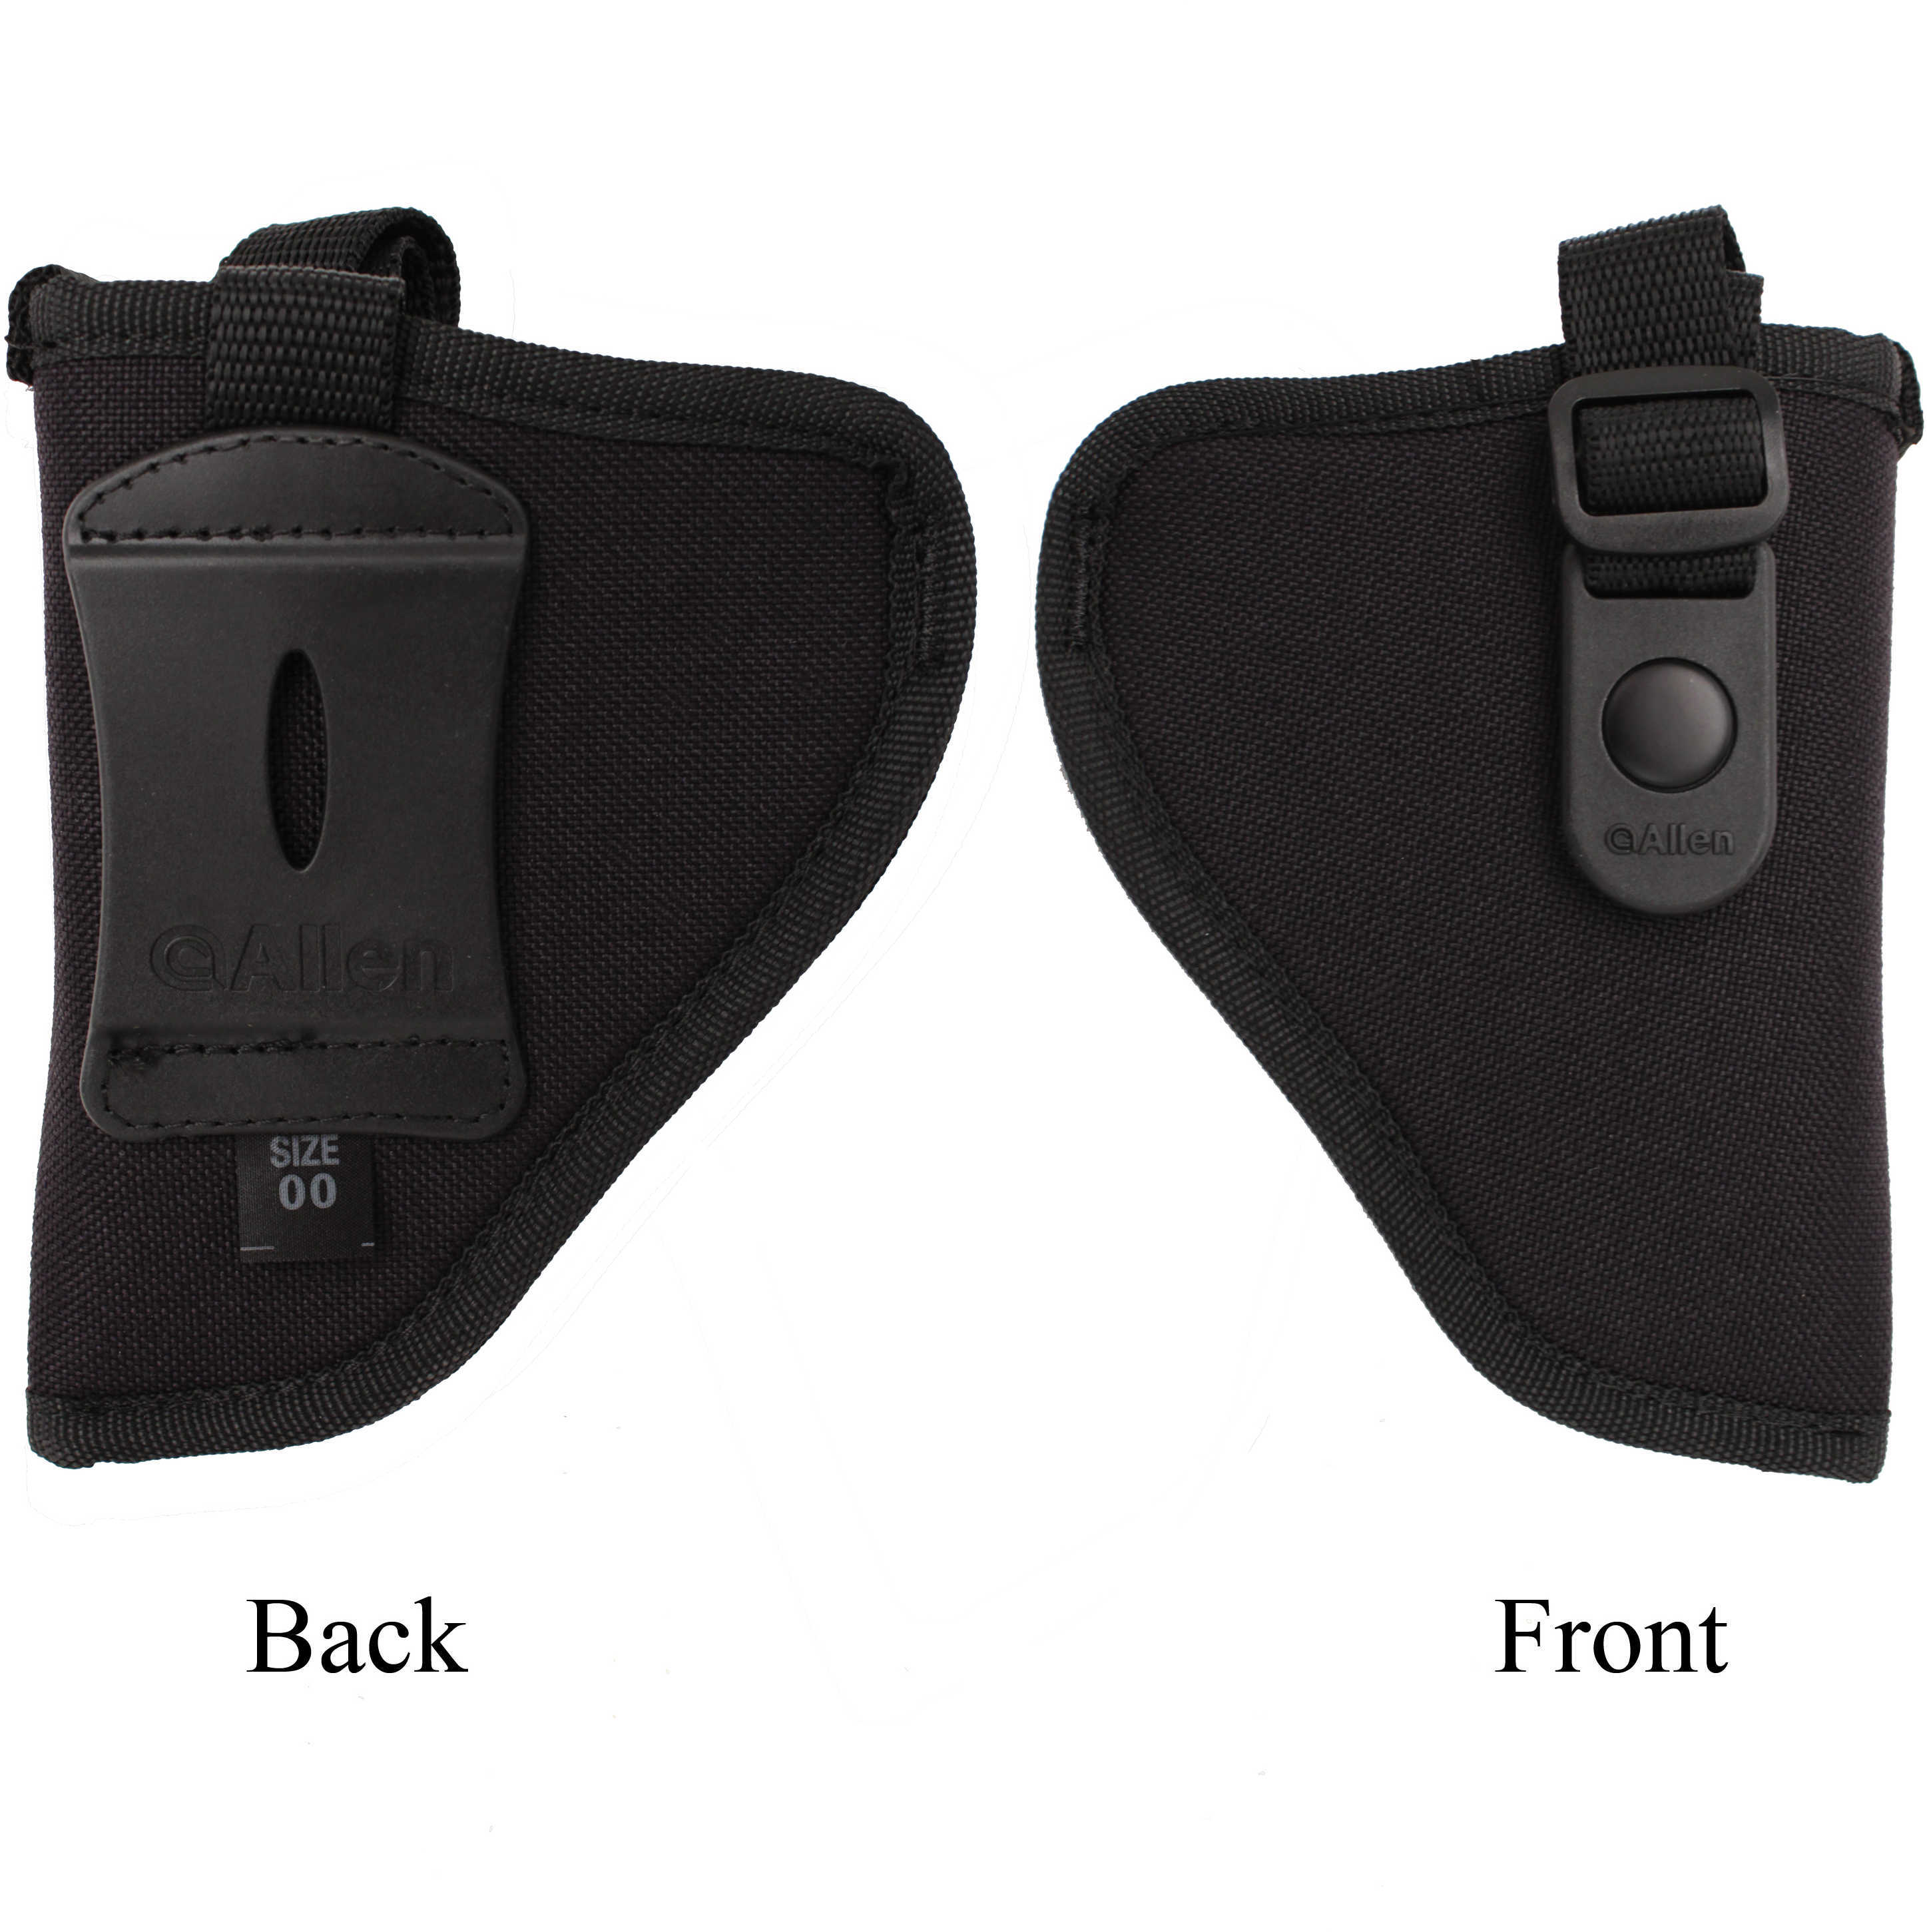 Allen Cortez Outside Waistband Holster Fits Small/medium Revolvers With A 2"-3" Barrel Nylon Construction Snap Closure M